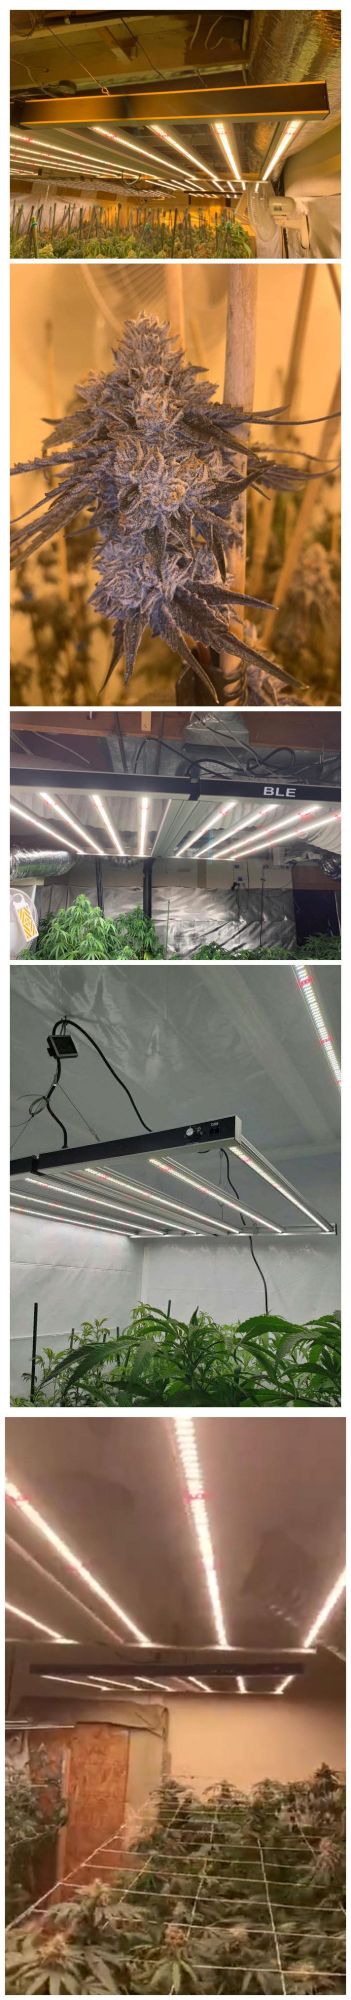 880W Horticulture Greenhouse Supplement LED Grow Light Dimming Timer Samsung Lm301b Inventronics Driver